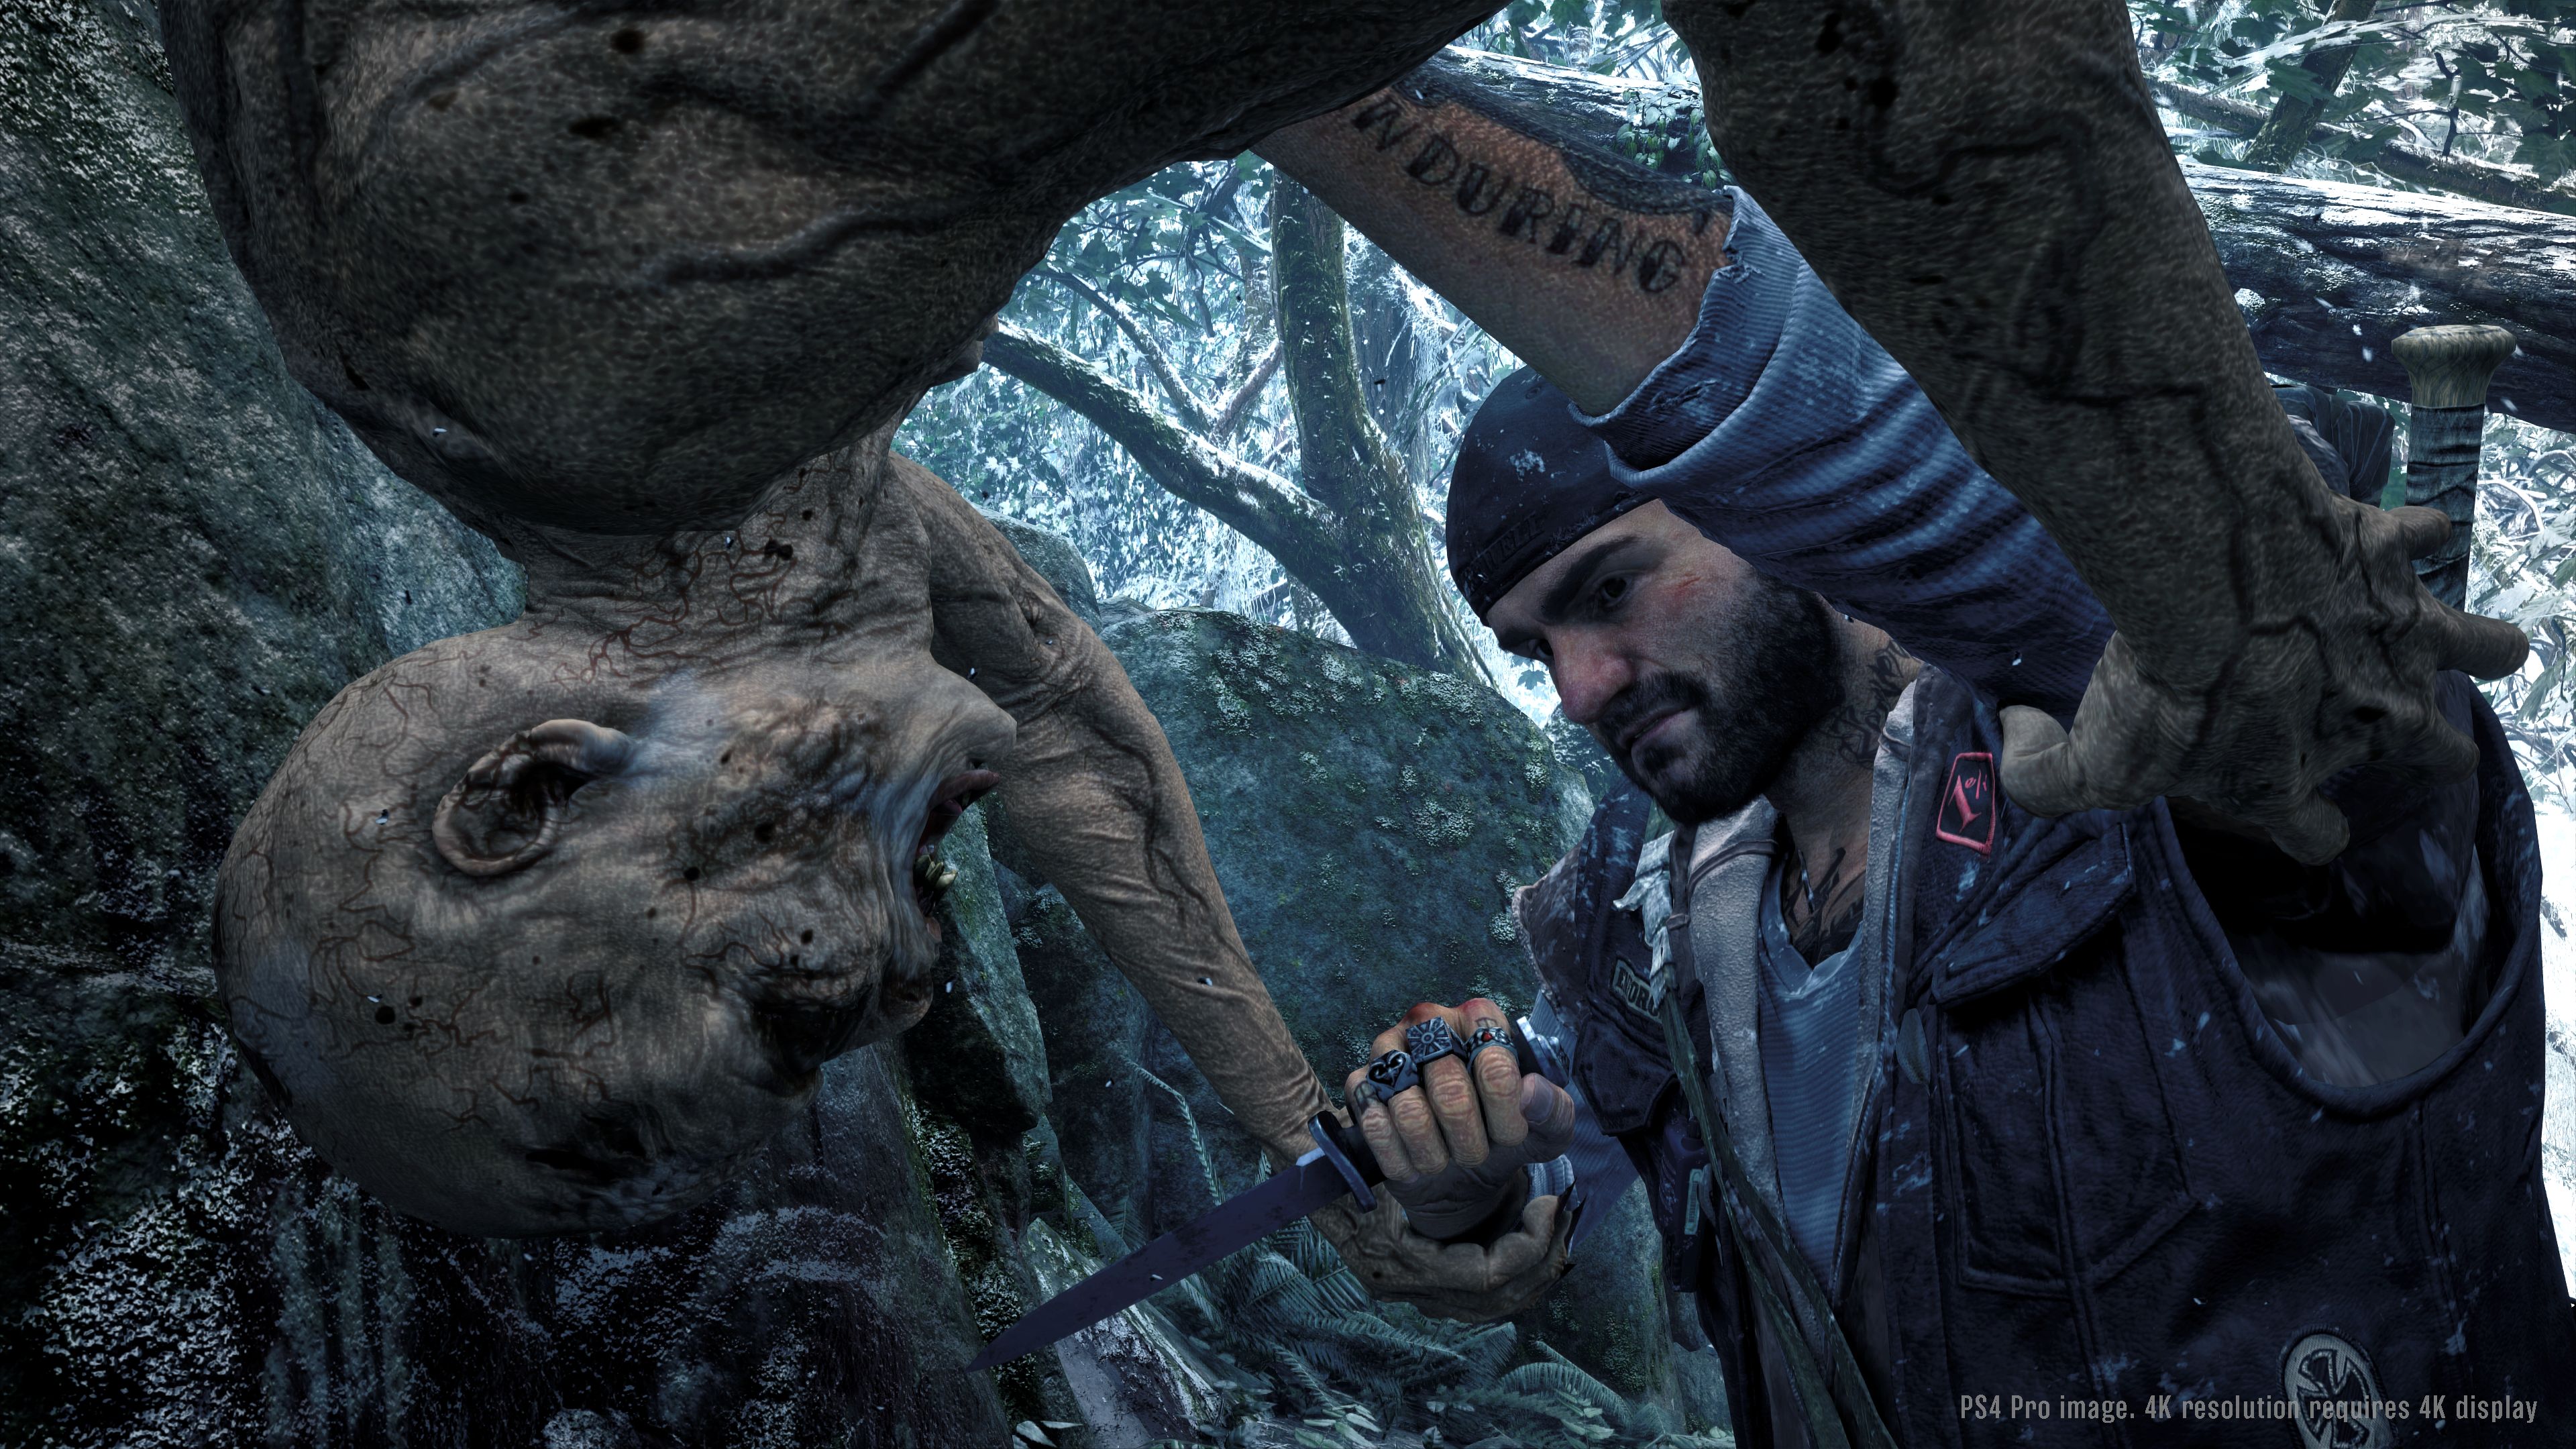 PS4s exclusive zombie game Days Gone deserves a chance to